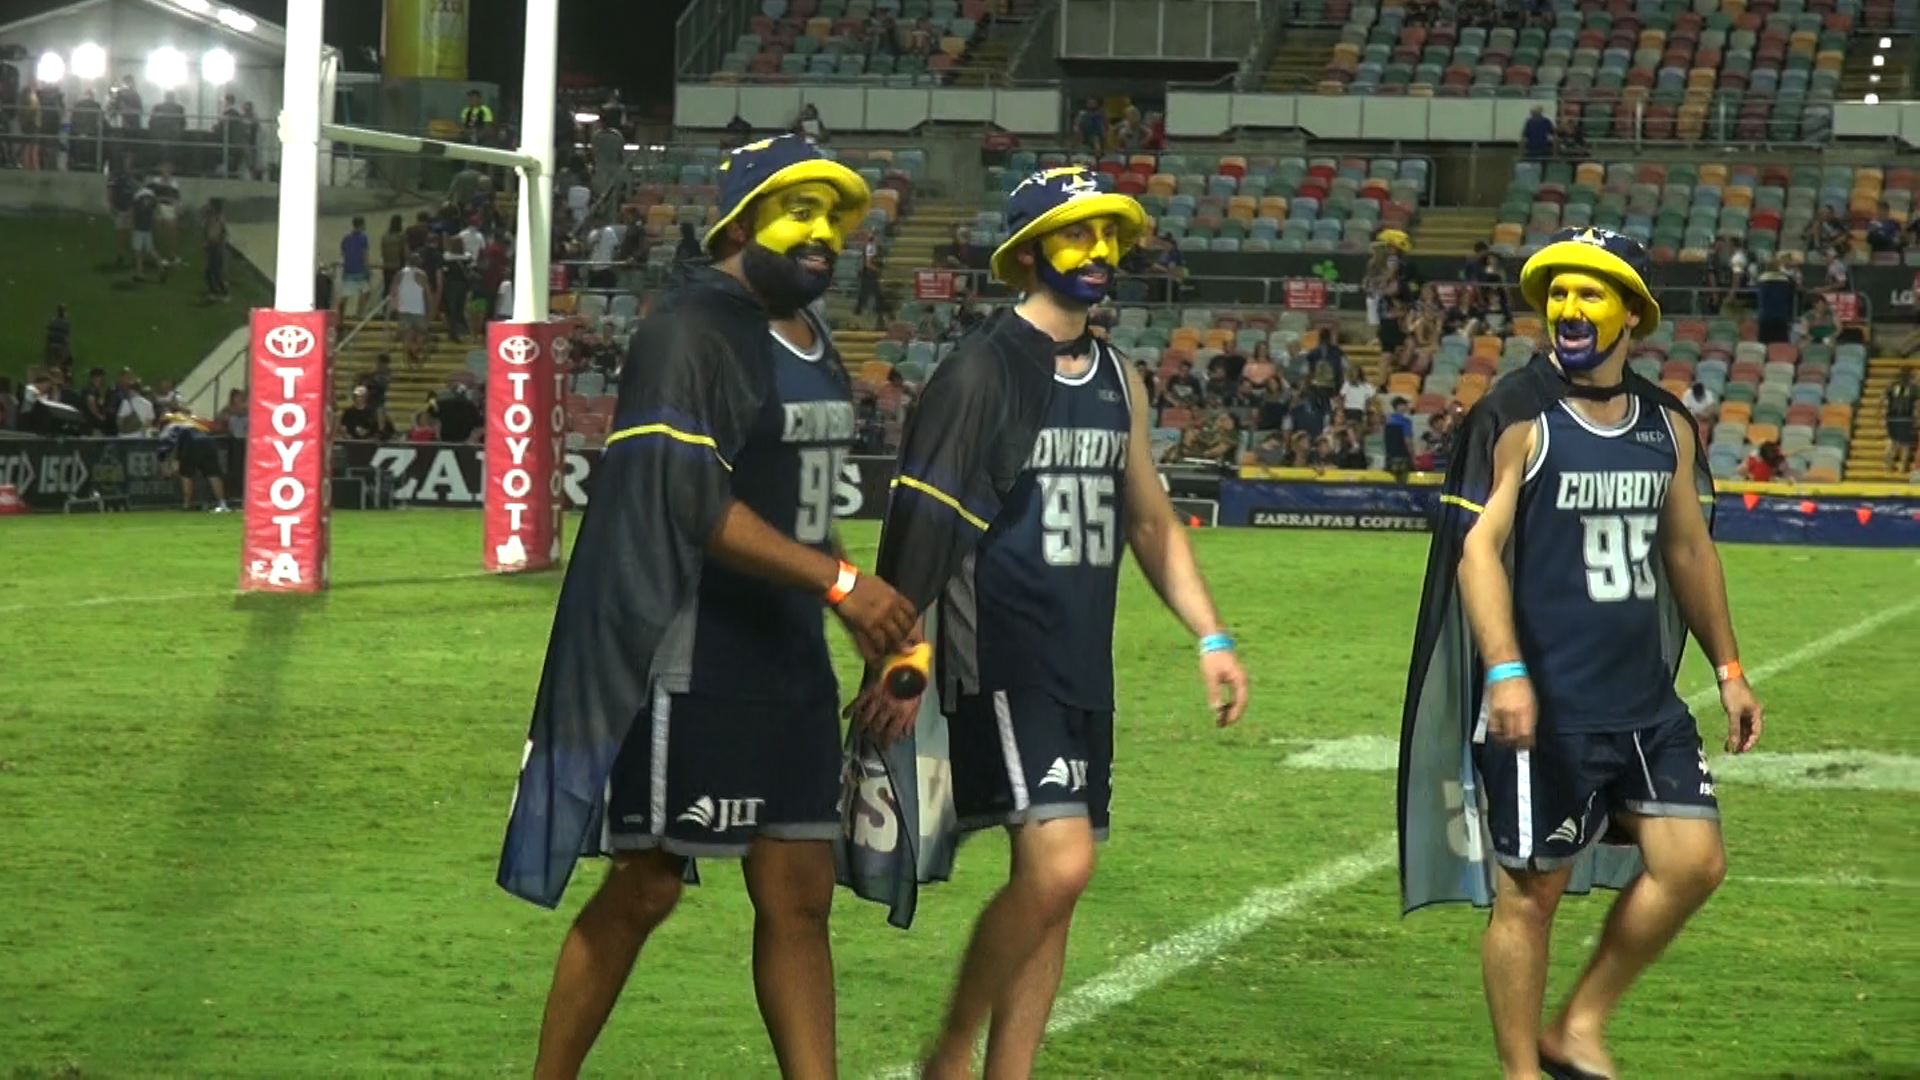 PNG Fans urged to fly Direct Port Moresby-Townsville Service to watch Cowboys play Live